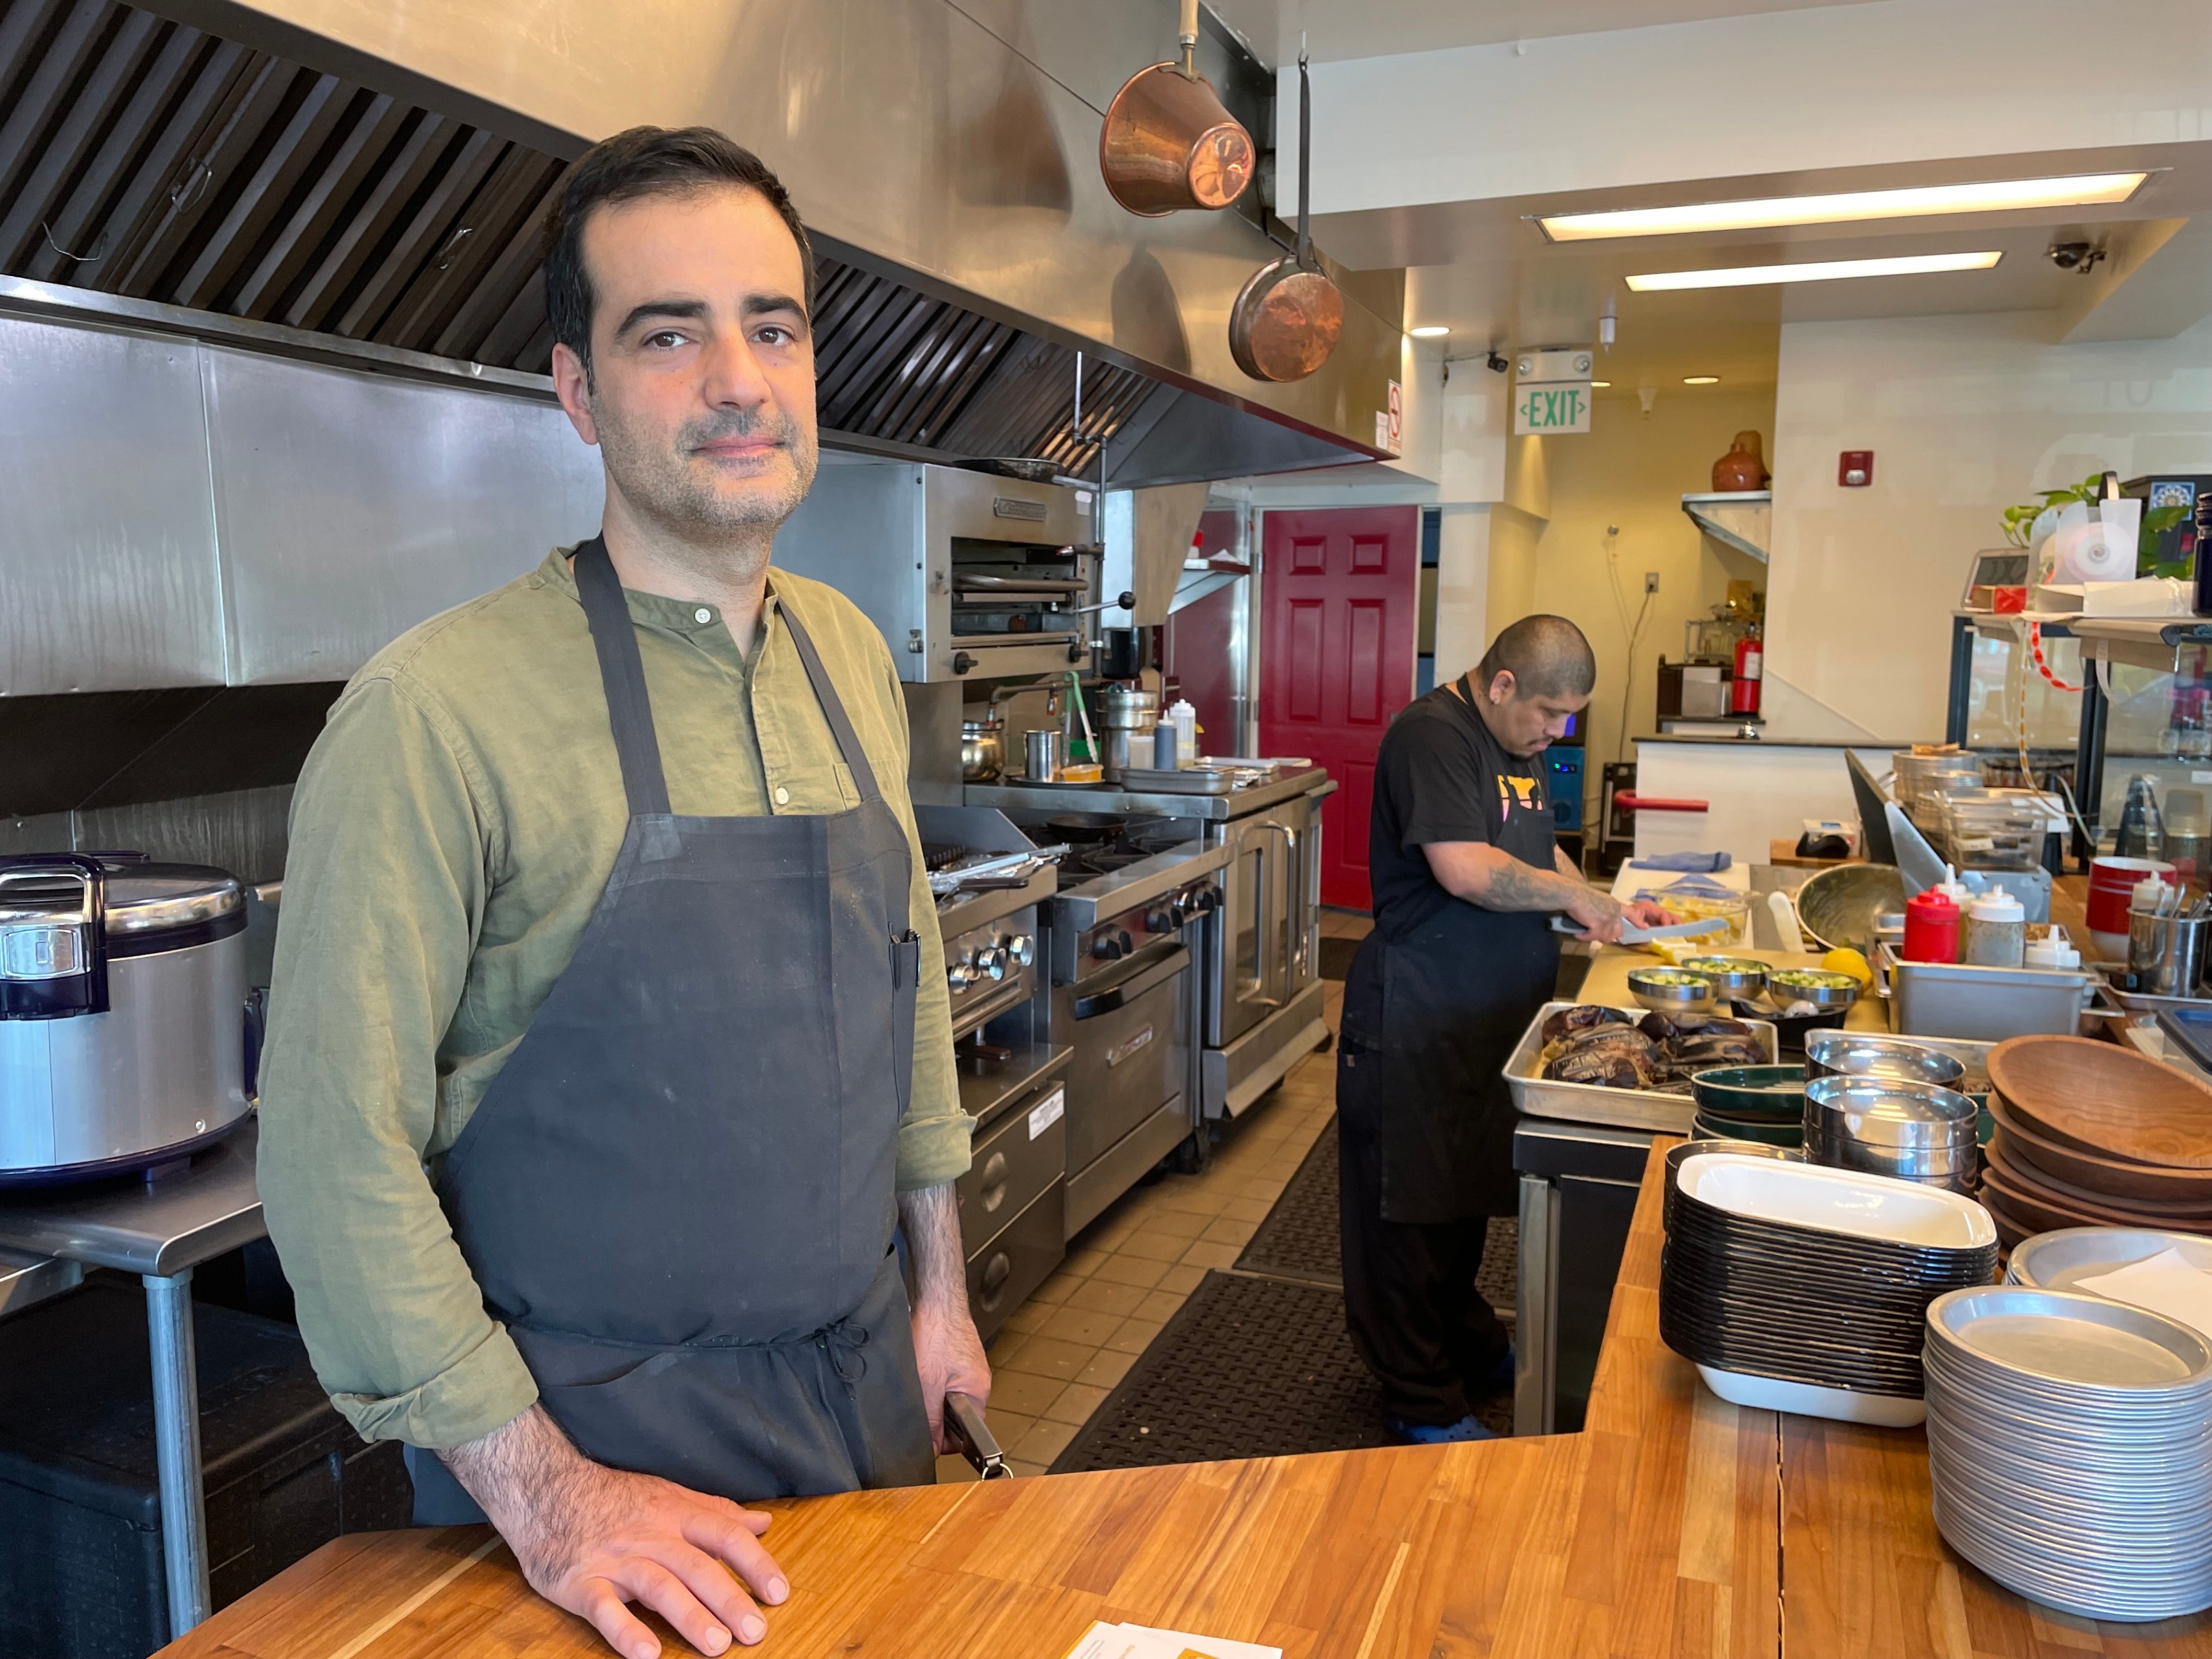 A man in a green shirt and grey apron stands with his hand on a wooden counter at a San Francisco restaurant with its kitchen and a sous chef chopping vegetables in the background.